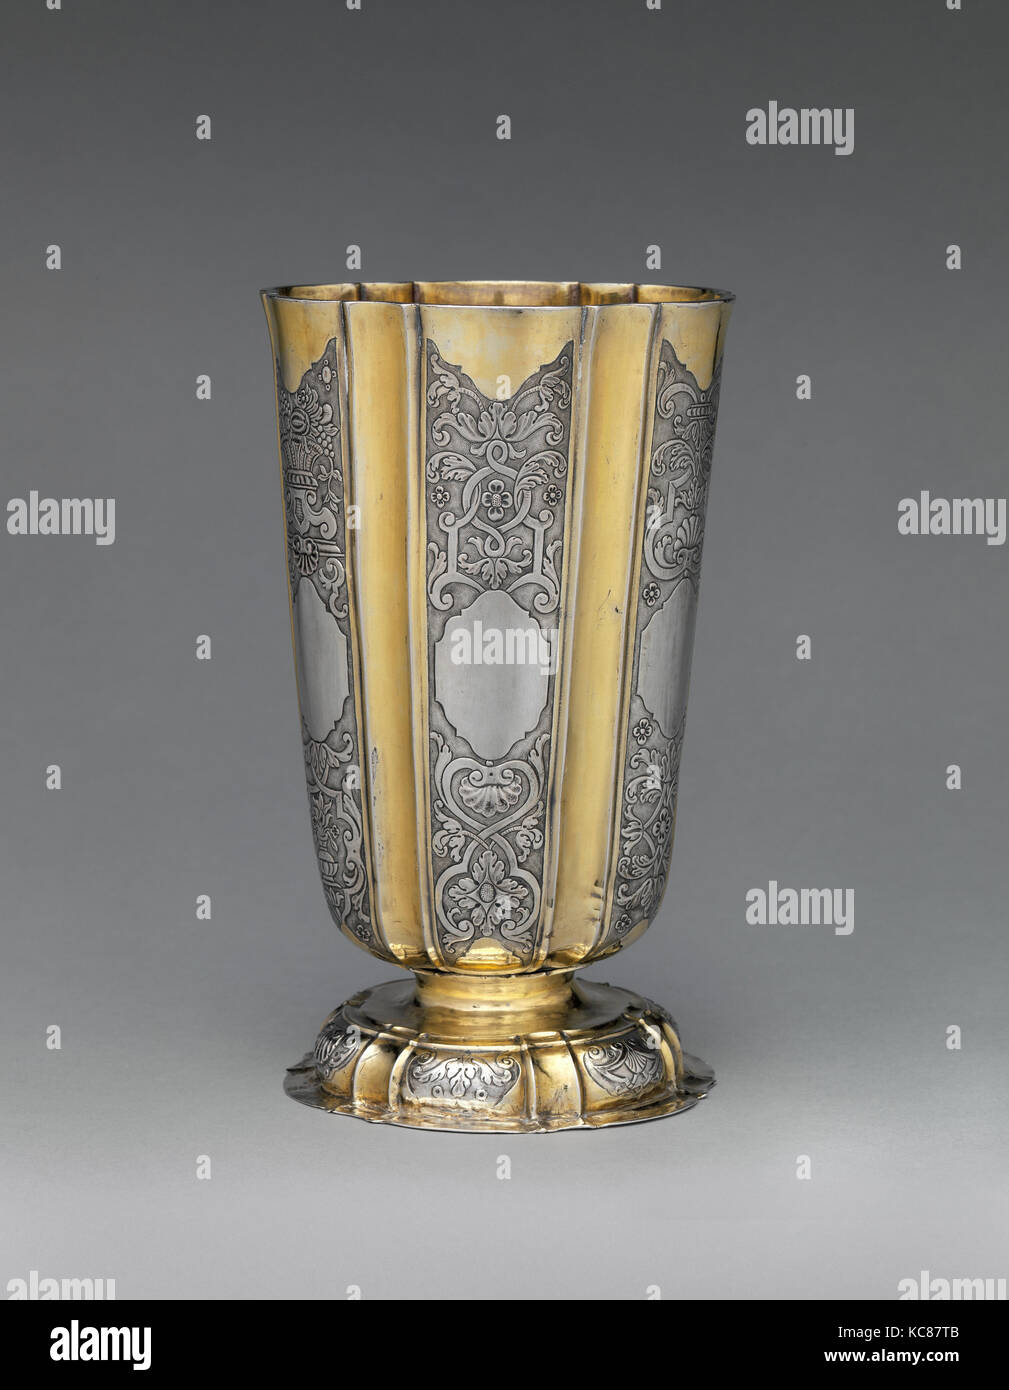 Beaker, ca. 1730–50, Hungarian, Silver, partly gilded, Overall: 7 7/8 x 4 13/16 in. (20 x 12.2 cm), Metalwork-Silver Stock Photo